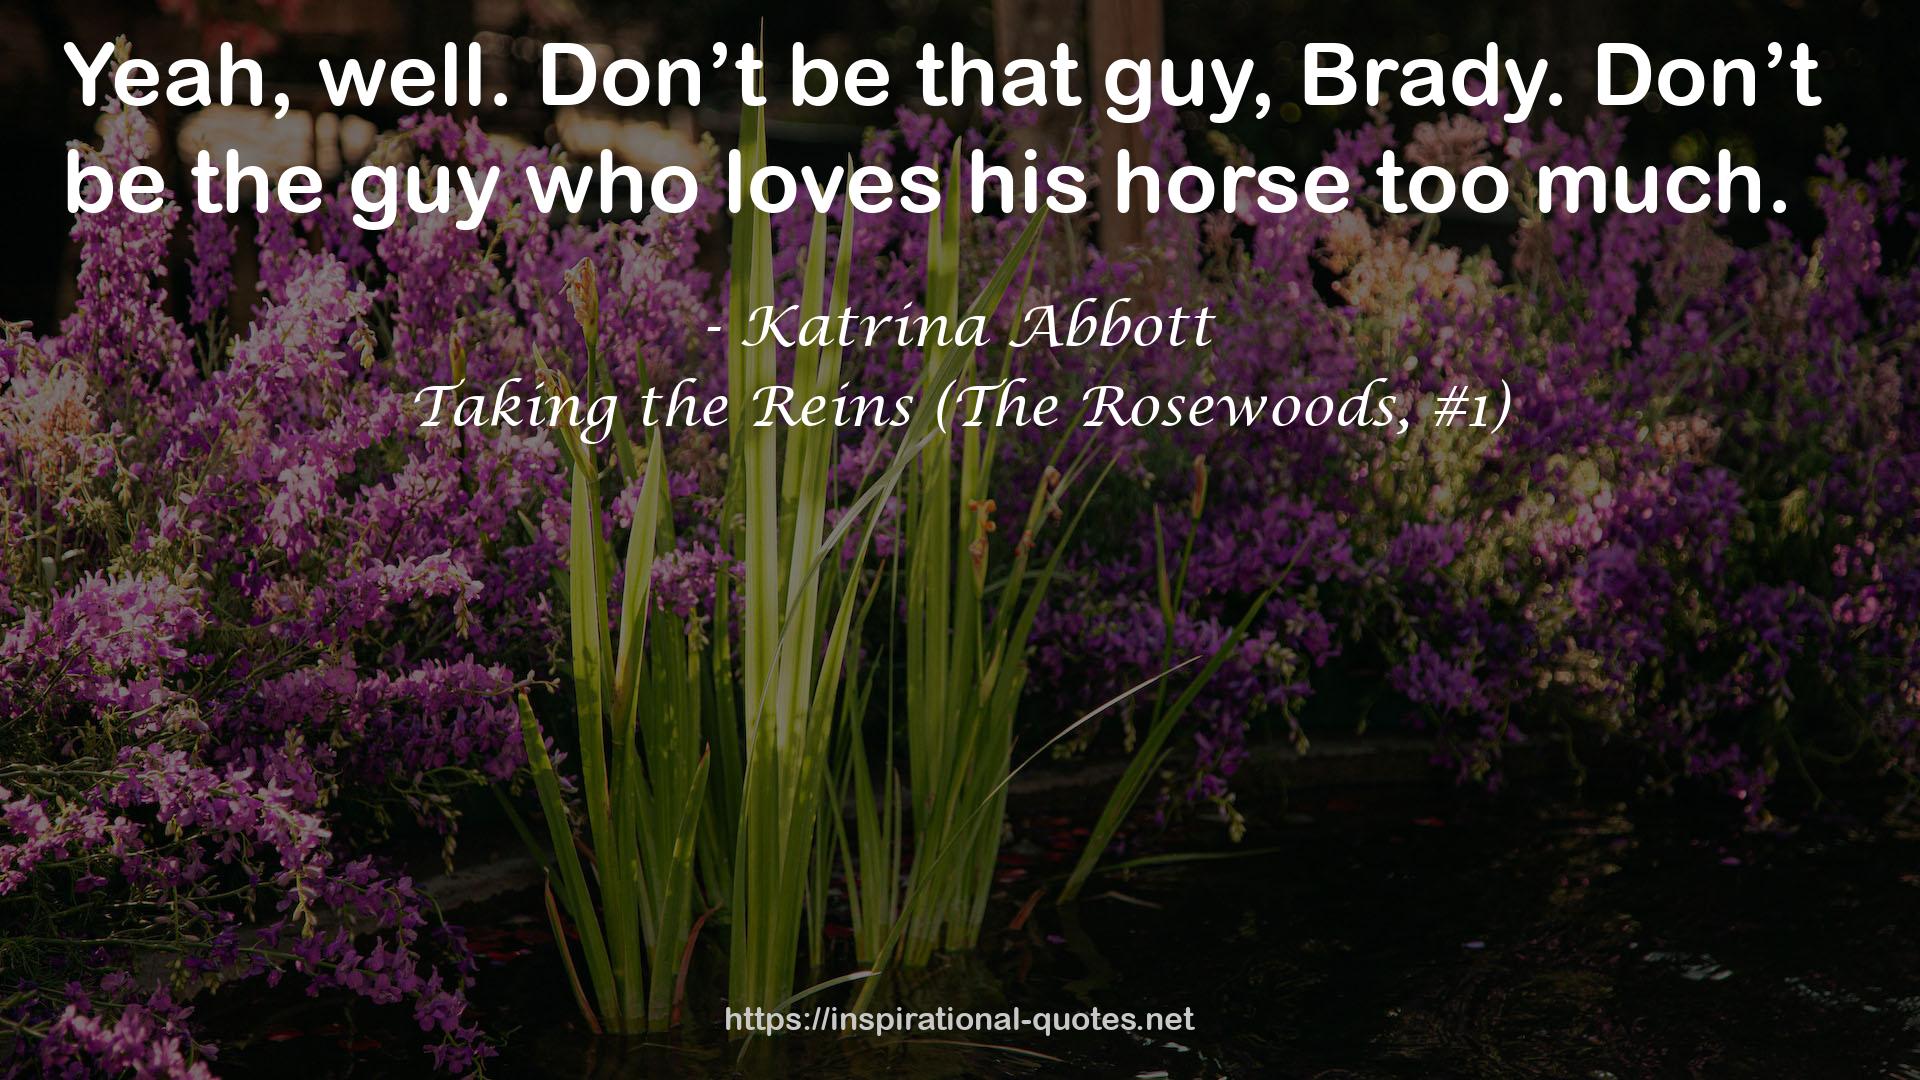 Taking the Reins (The Rosewoods, #1) QUOTES